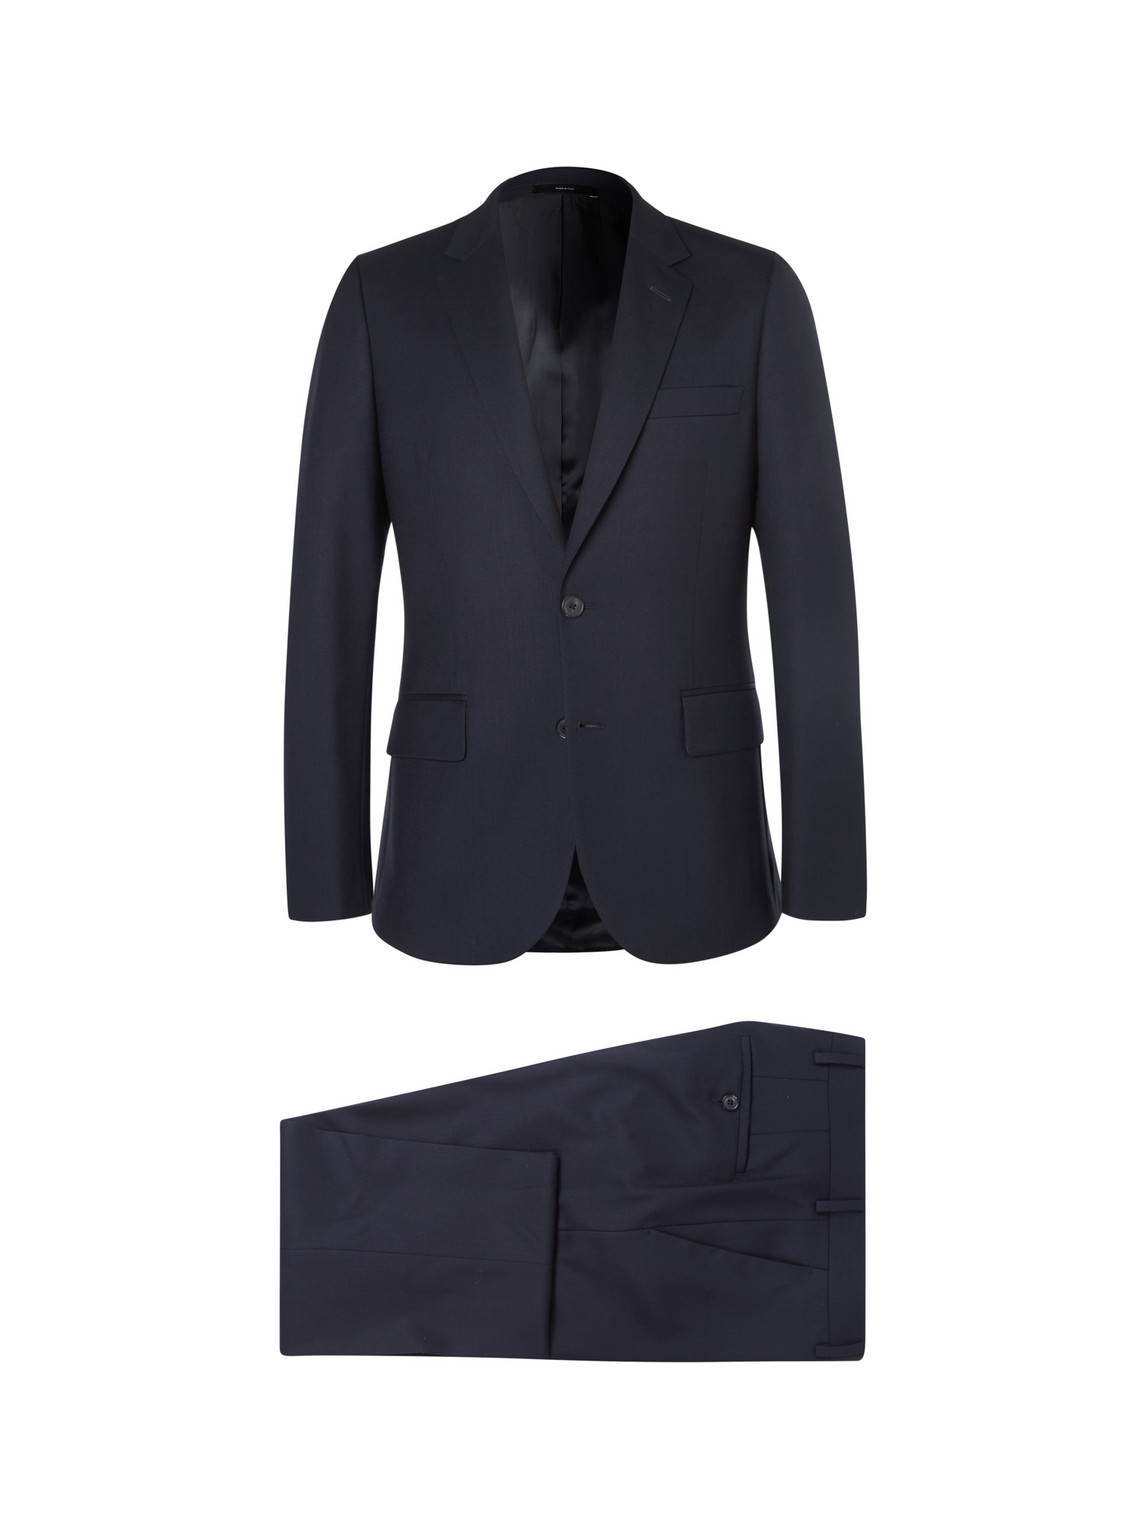 Paul Smith Navy A Suit To Travel In Soho Slim-Fit Wool Suit